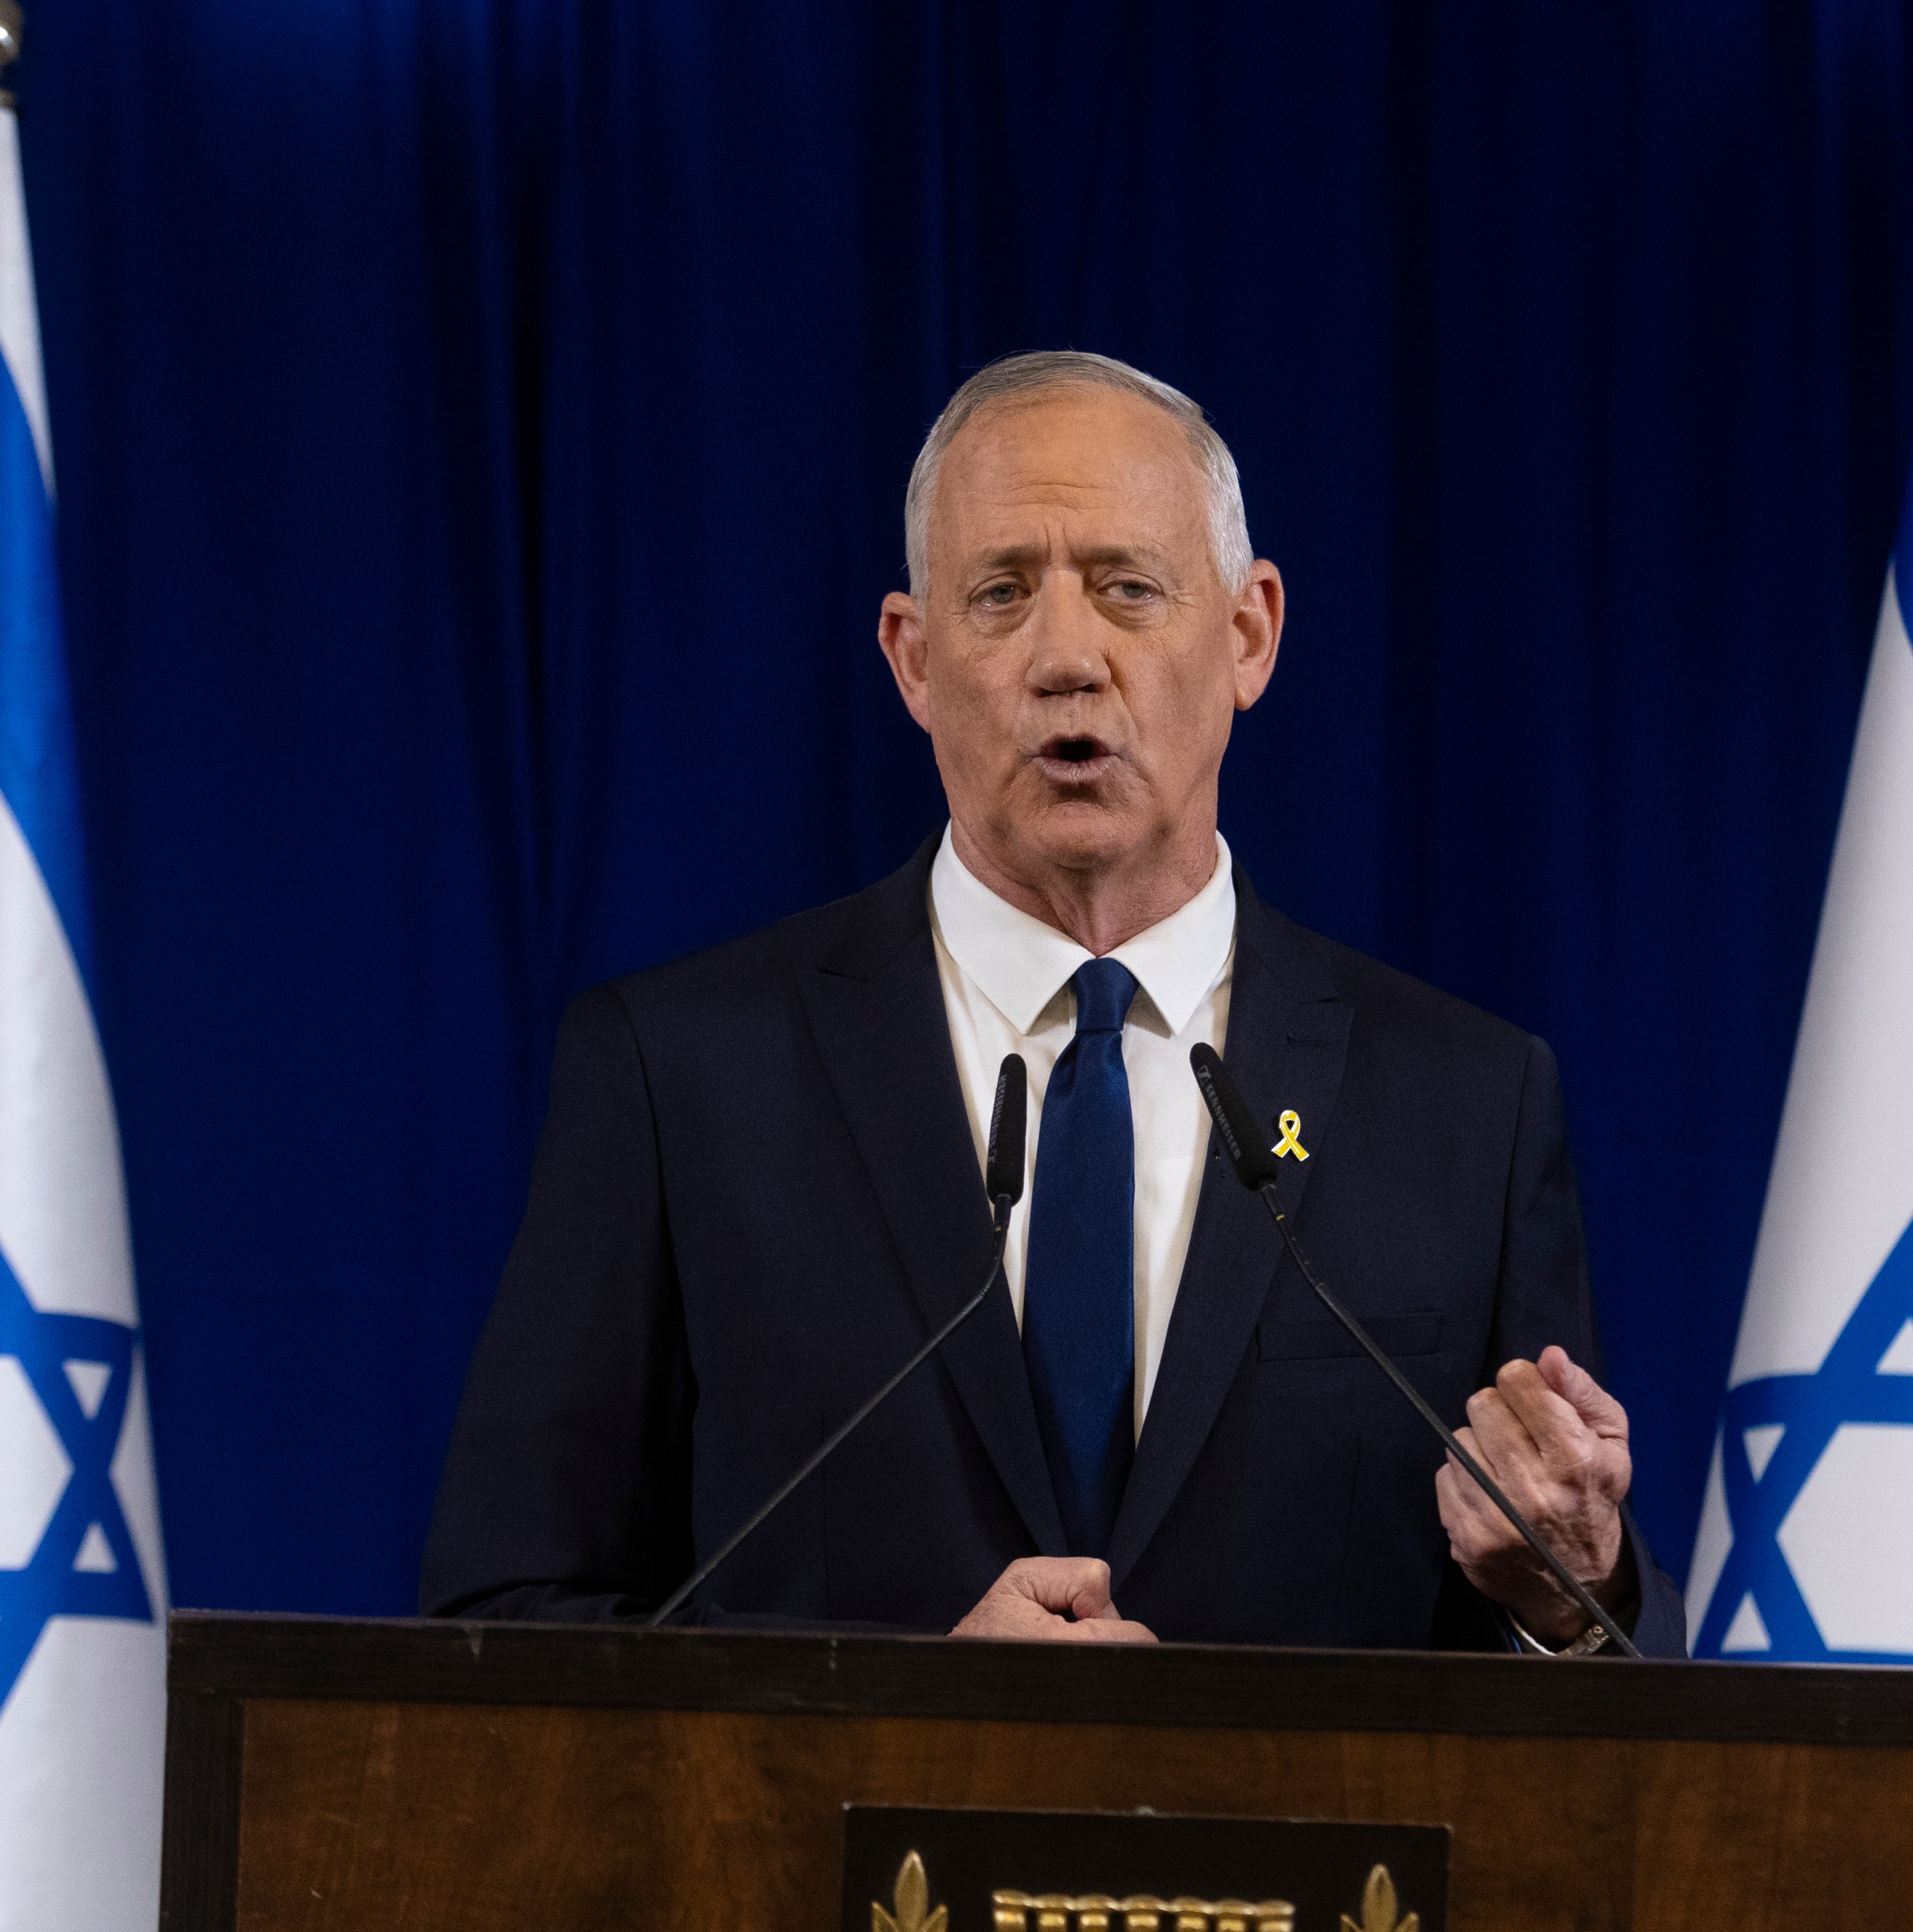 Israel’s “war cabinet” just fell apart. What happens now?